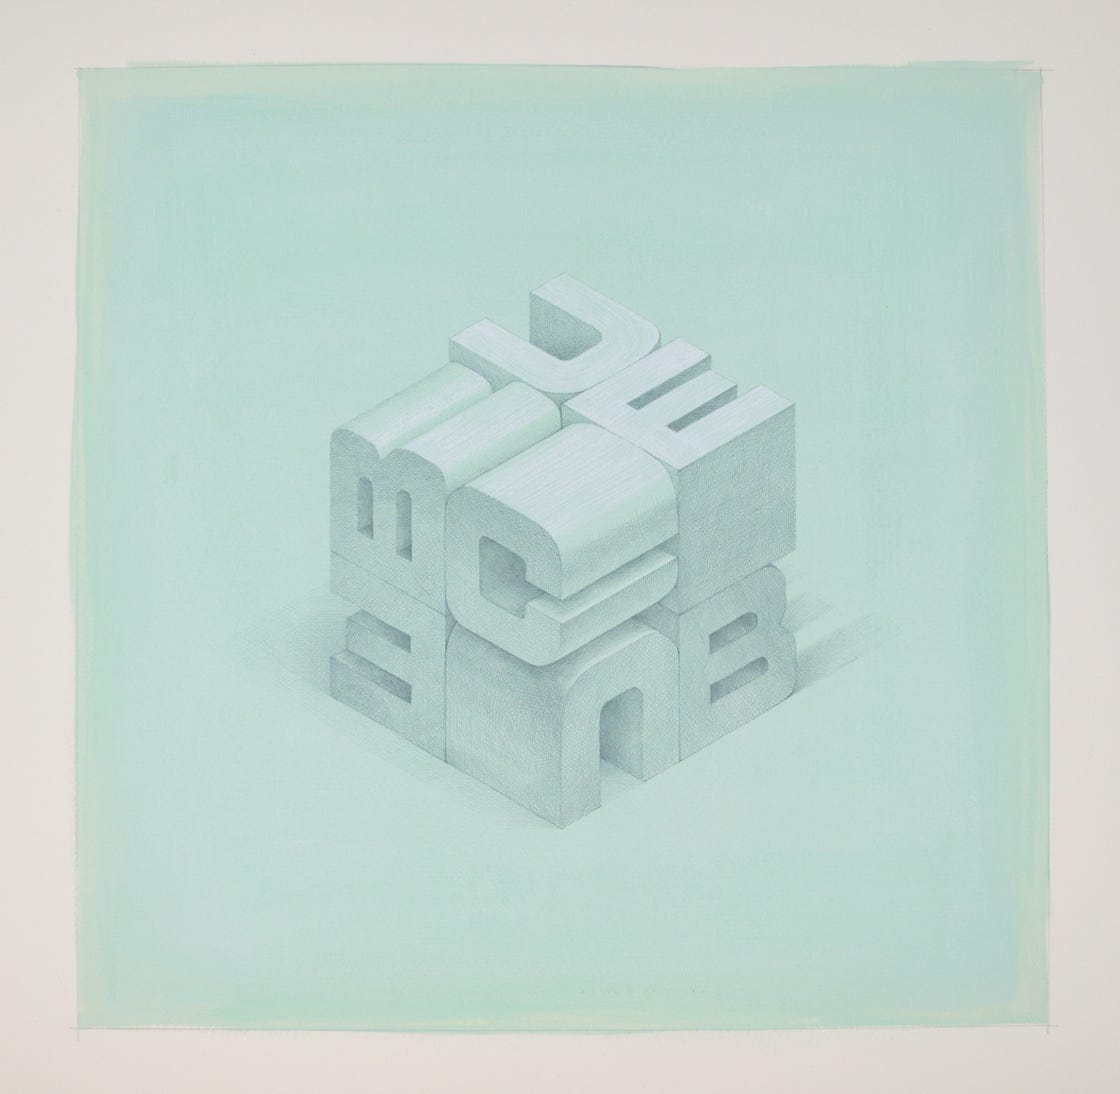 Cube³, 2016, silverpoint with white gouache on prepared paper, 16 x 16 inches (sheet size)